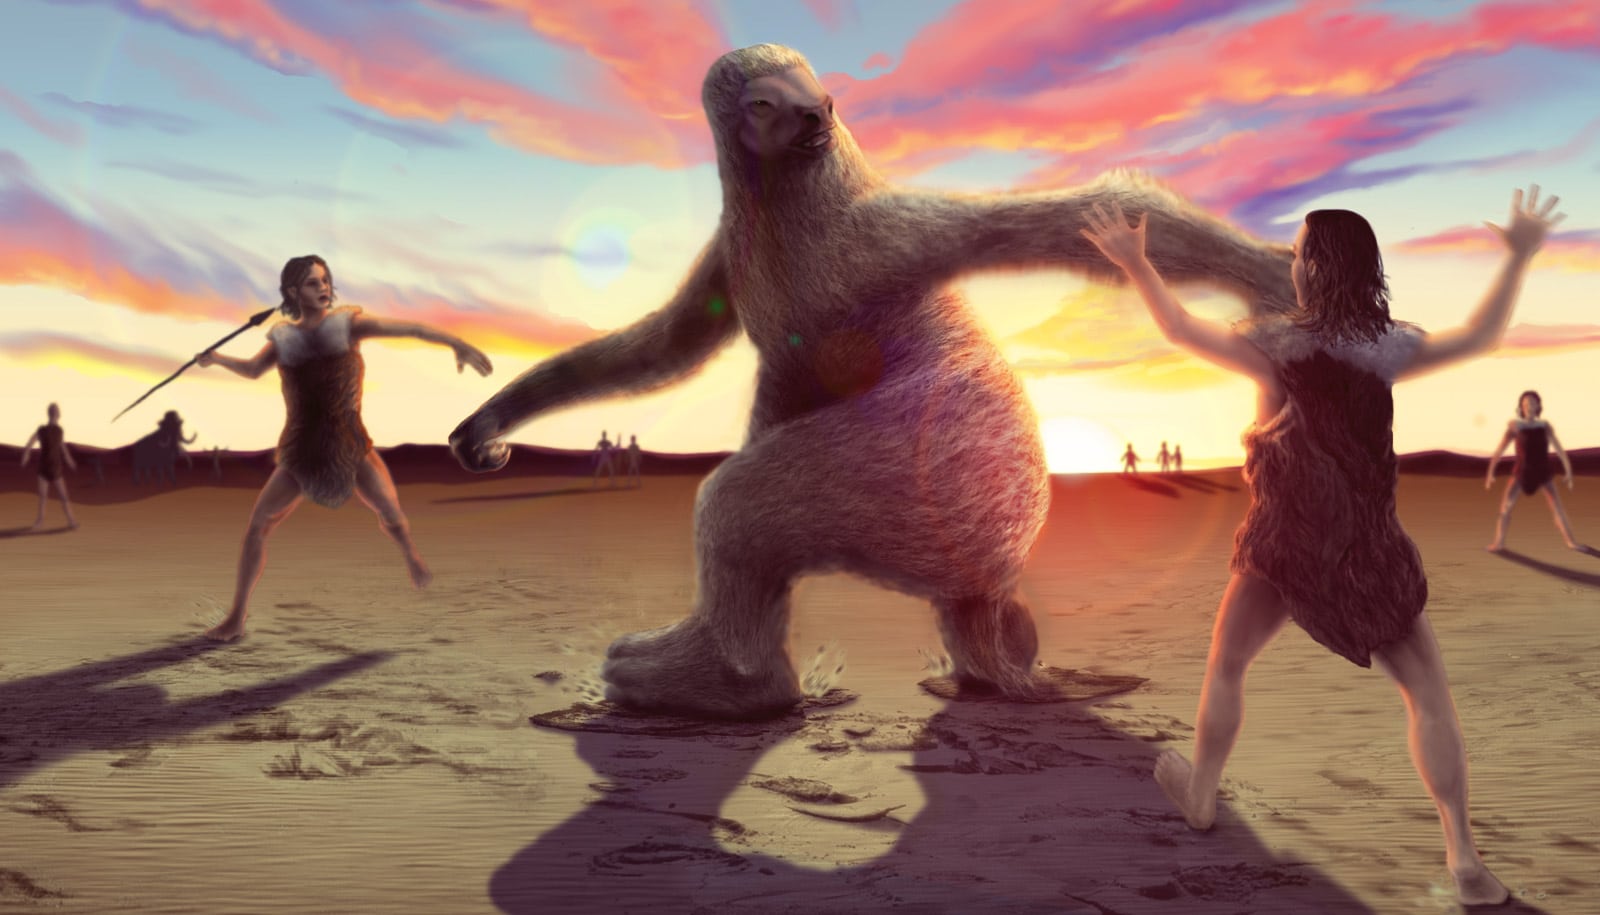 illustration of giant ground sloth and hunting humans